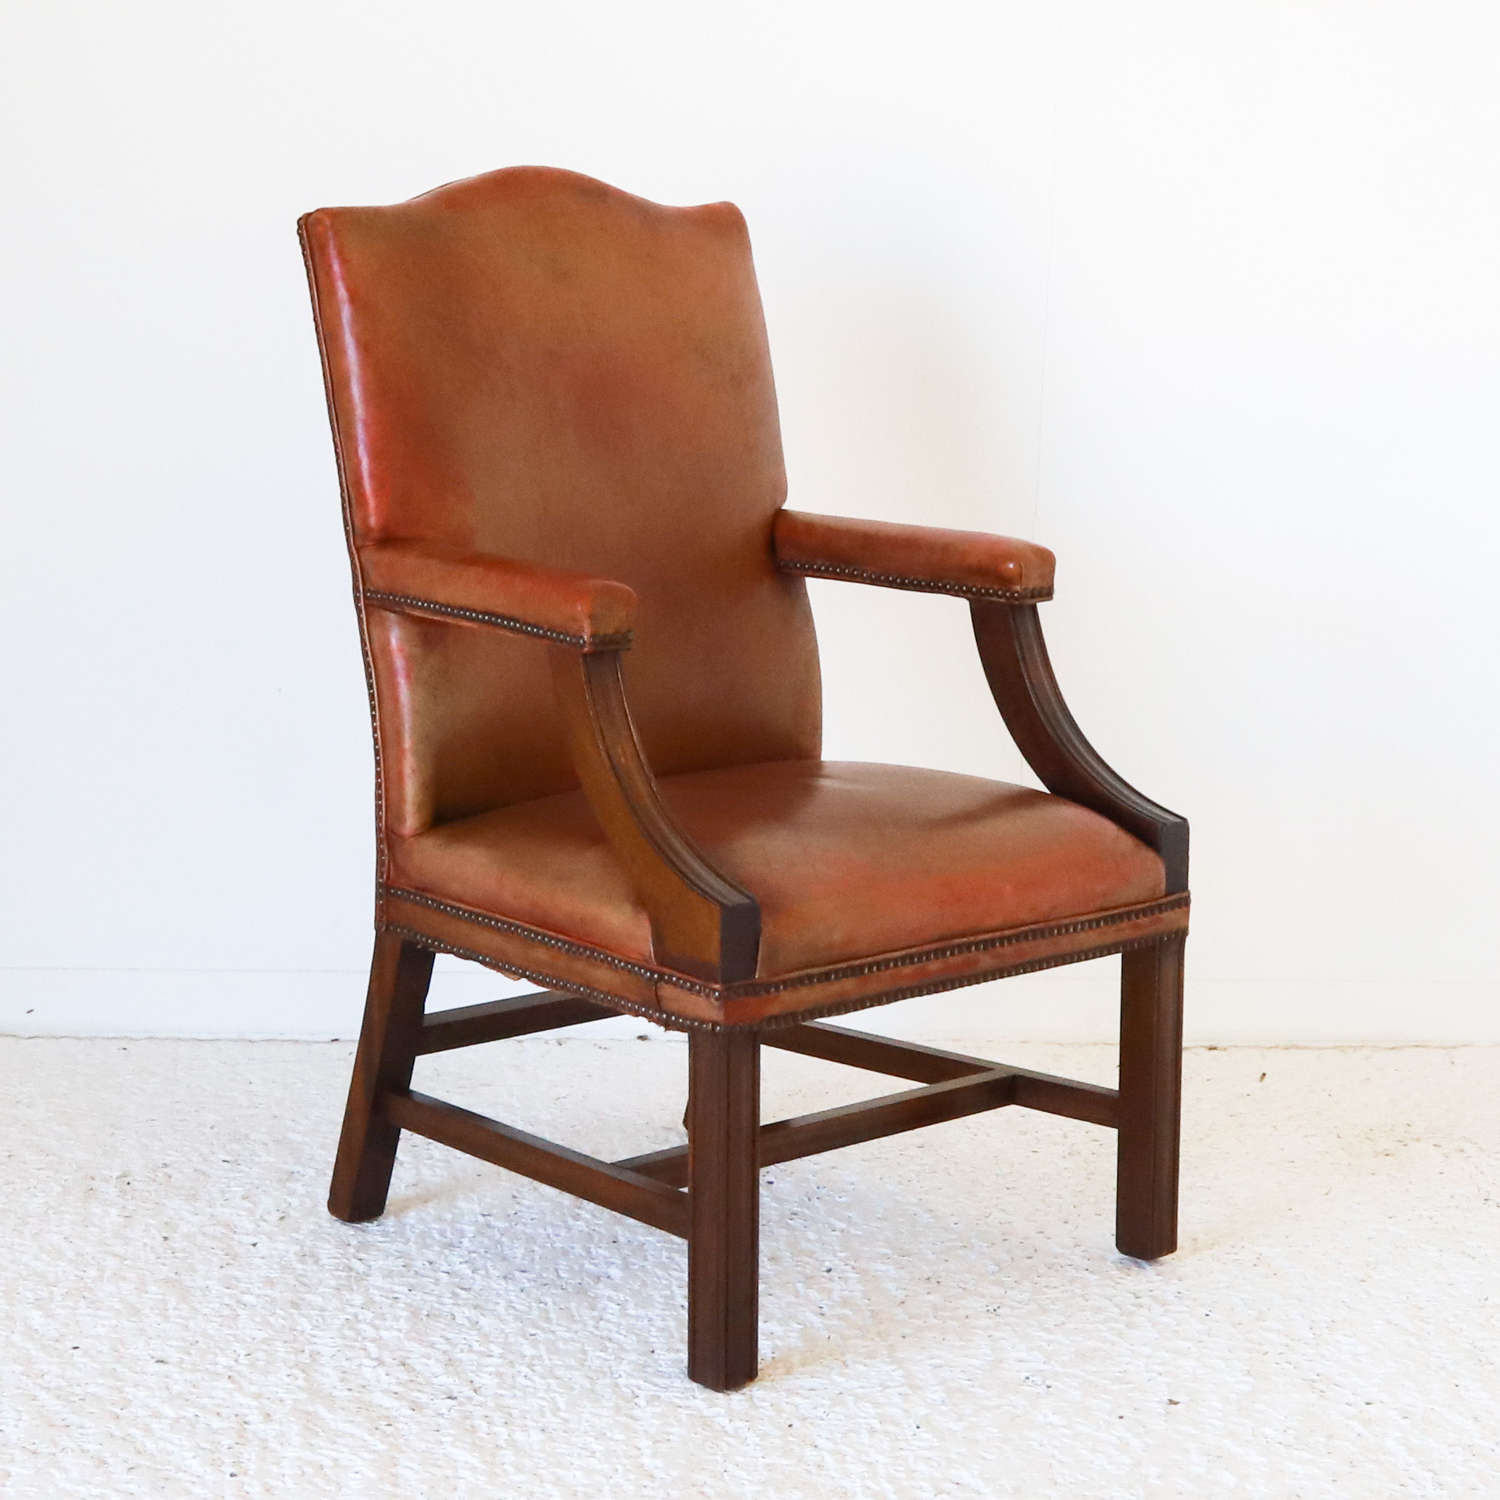 English 1940s mahogany Gainsborough library chair in old red leather